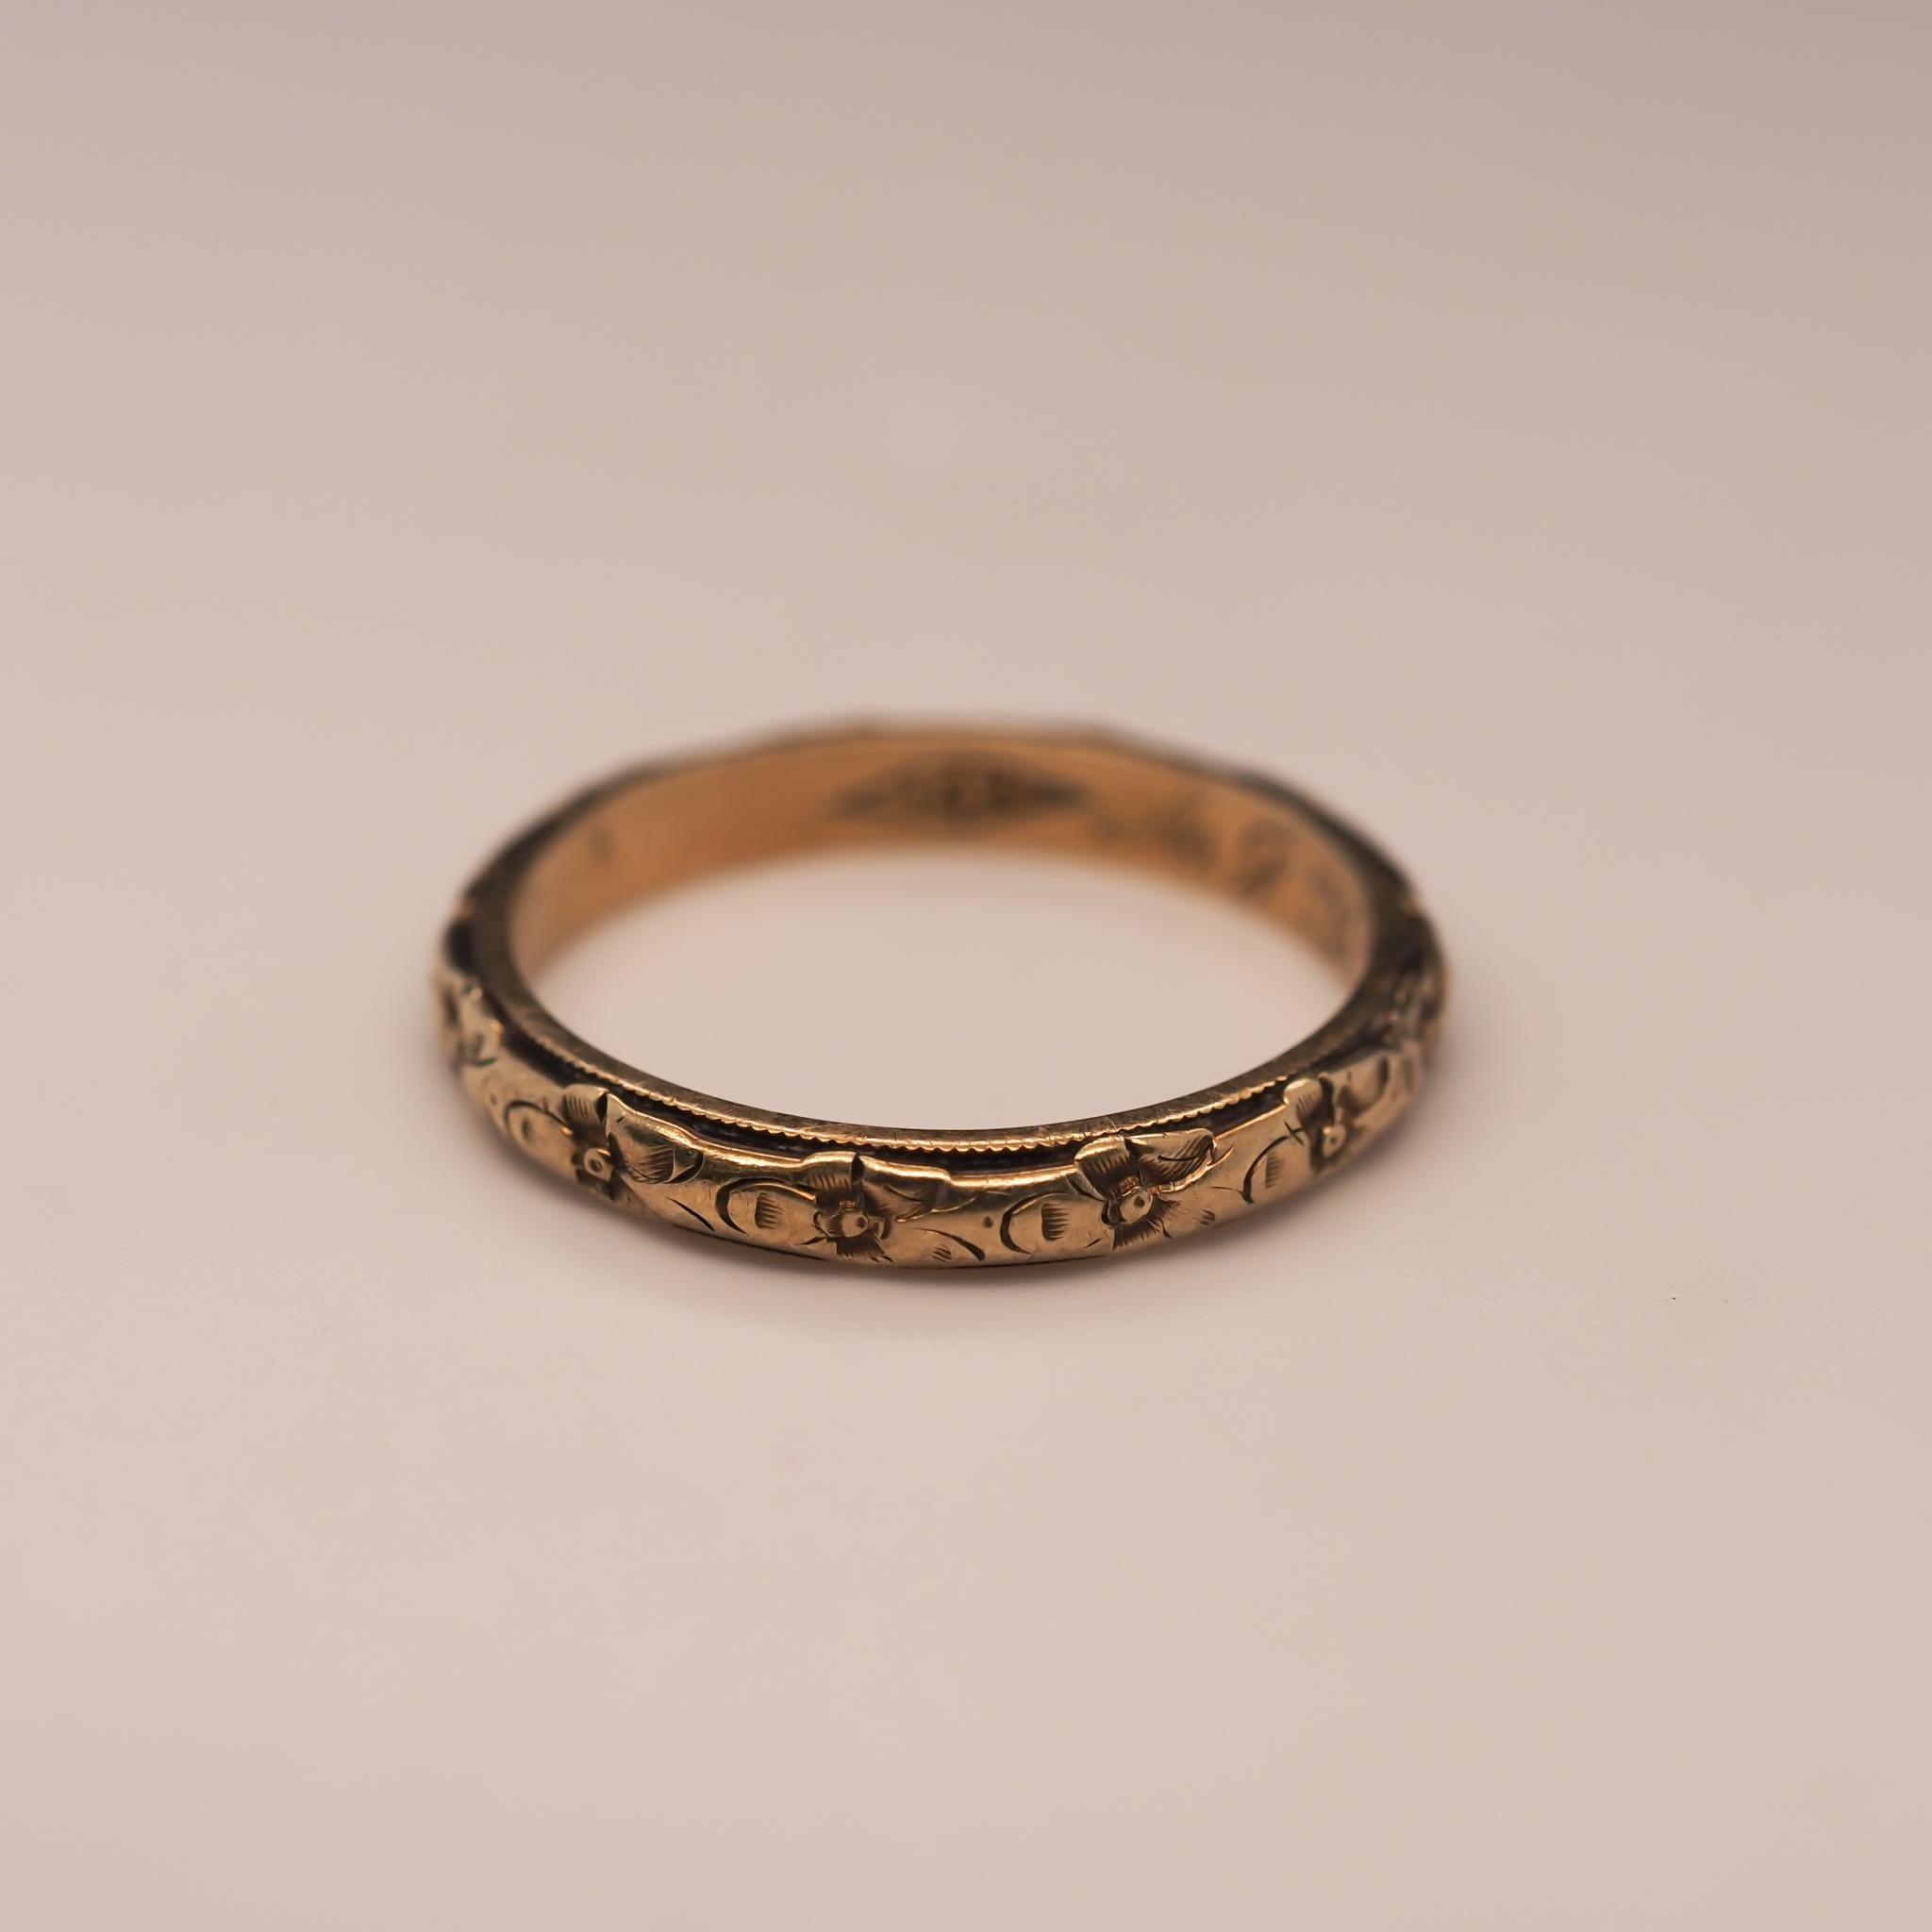 Ring Size: 7.75
Metal Type: 14K Yellow Gold [Hallmarked, and Tested]
Weight: 3.1 grams

Band Width: 2.9 mm
Condition: Excellent